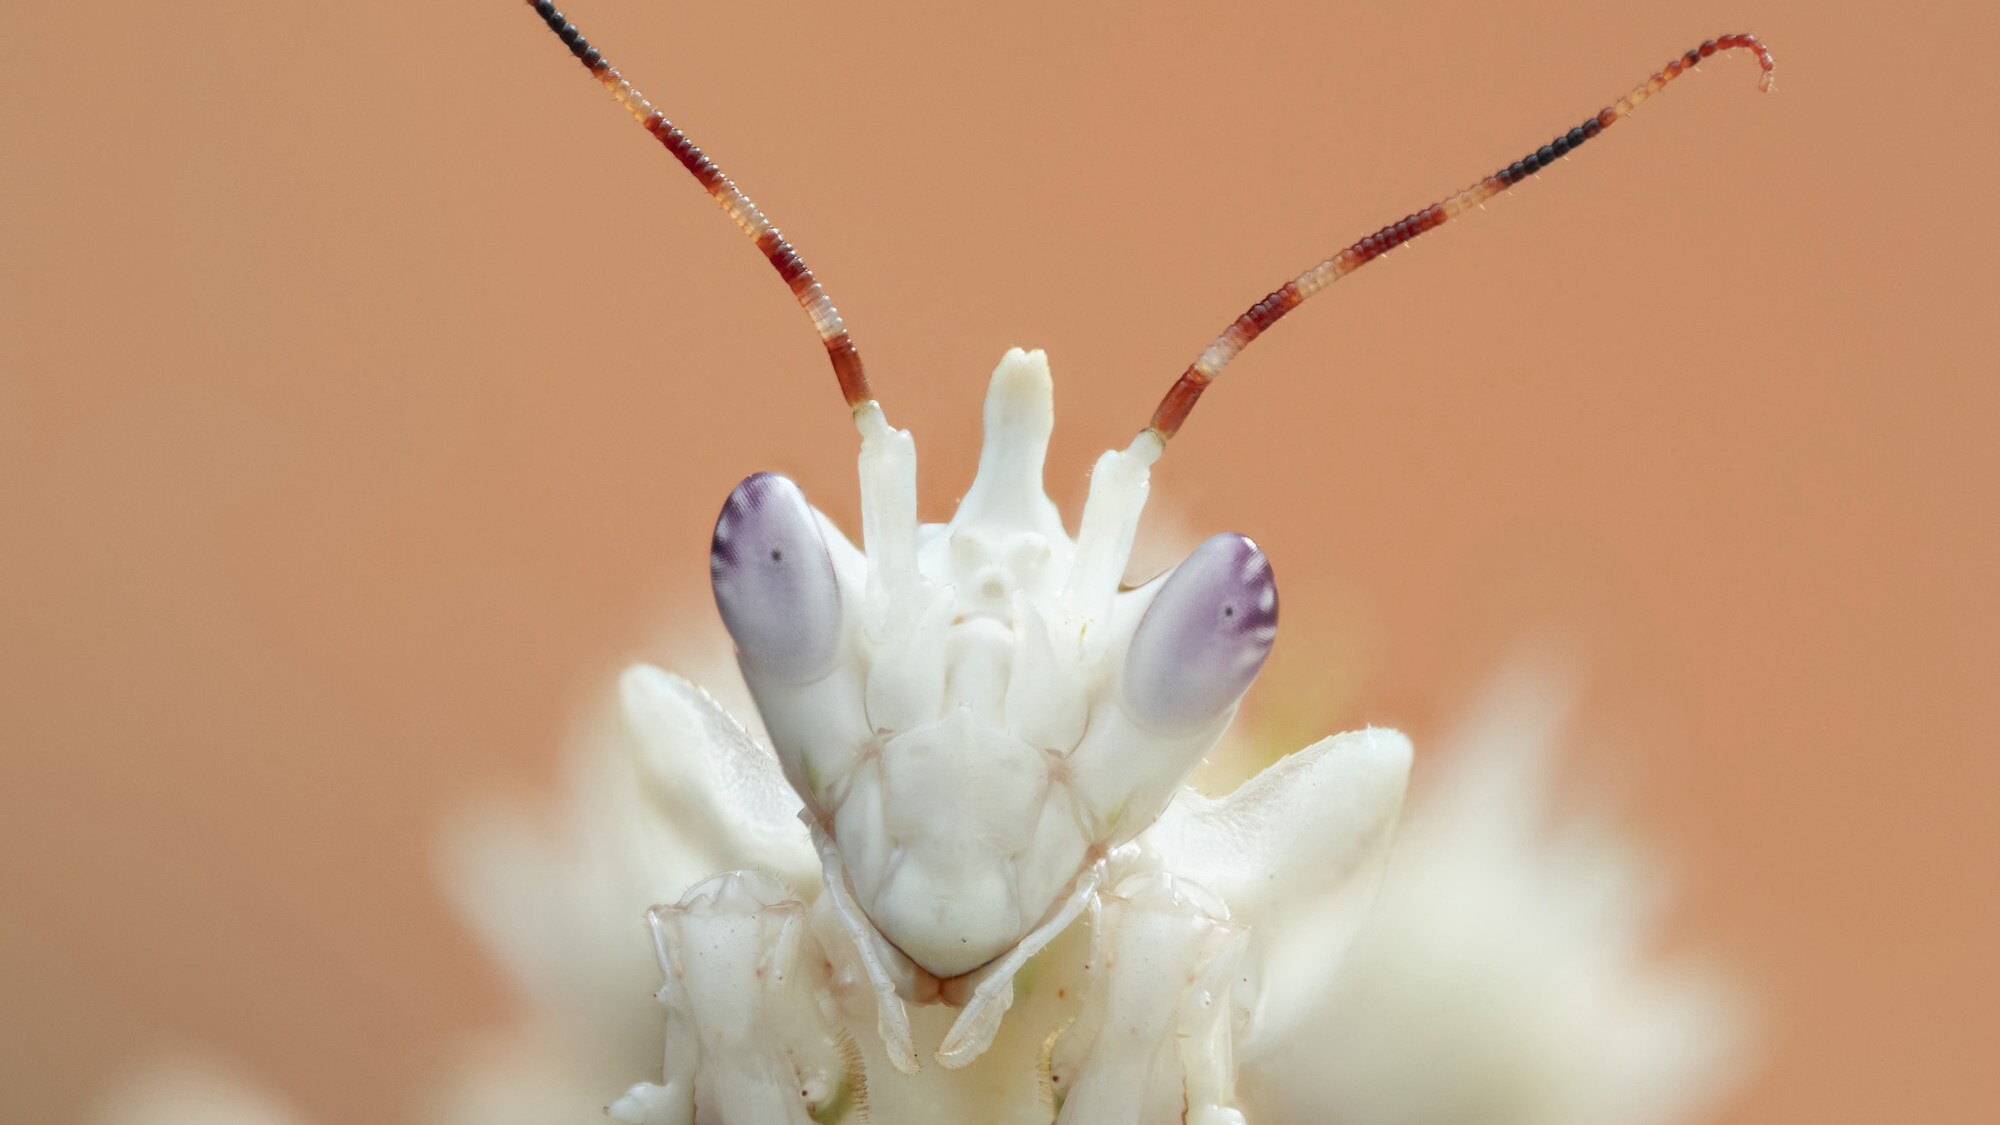 A spiny flower mantis is featured in the "Land of Giants" episode of "A Real Bug's Life". (National Geographic/Jamie Thorpe)